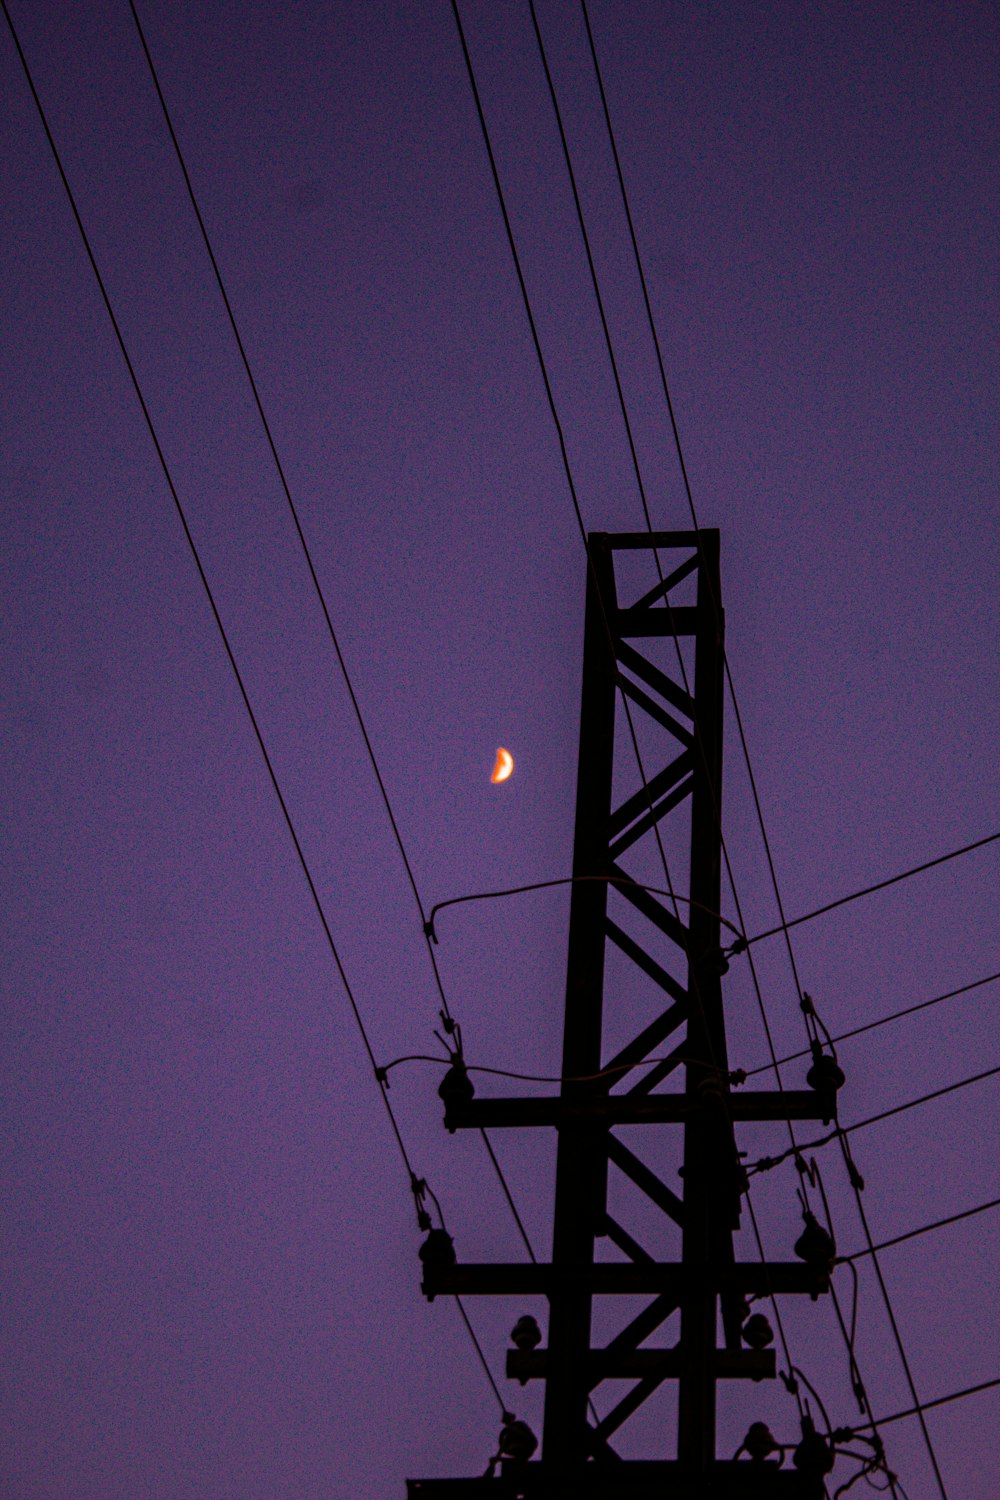 a full moon is seen behind power lines